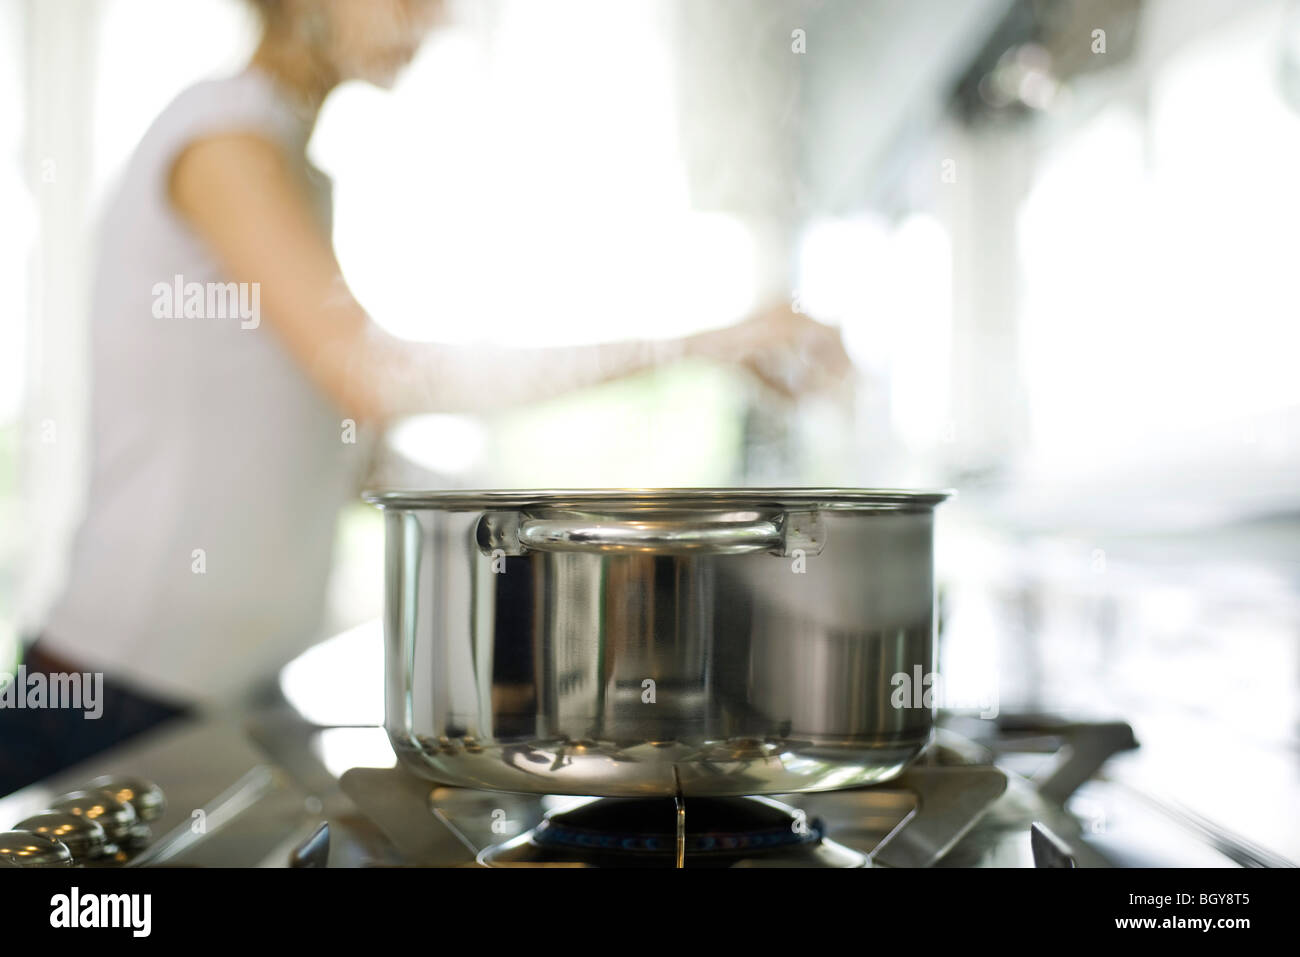 Pot cooking on stove, woman in background Stock Photo